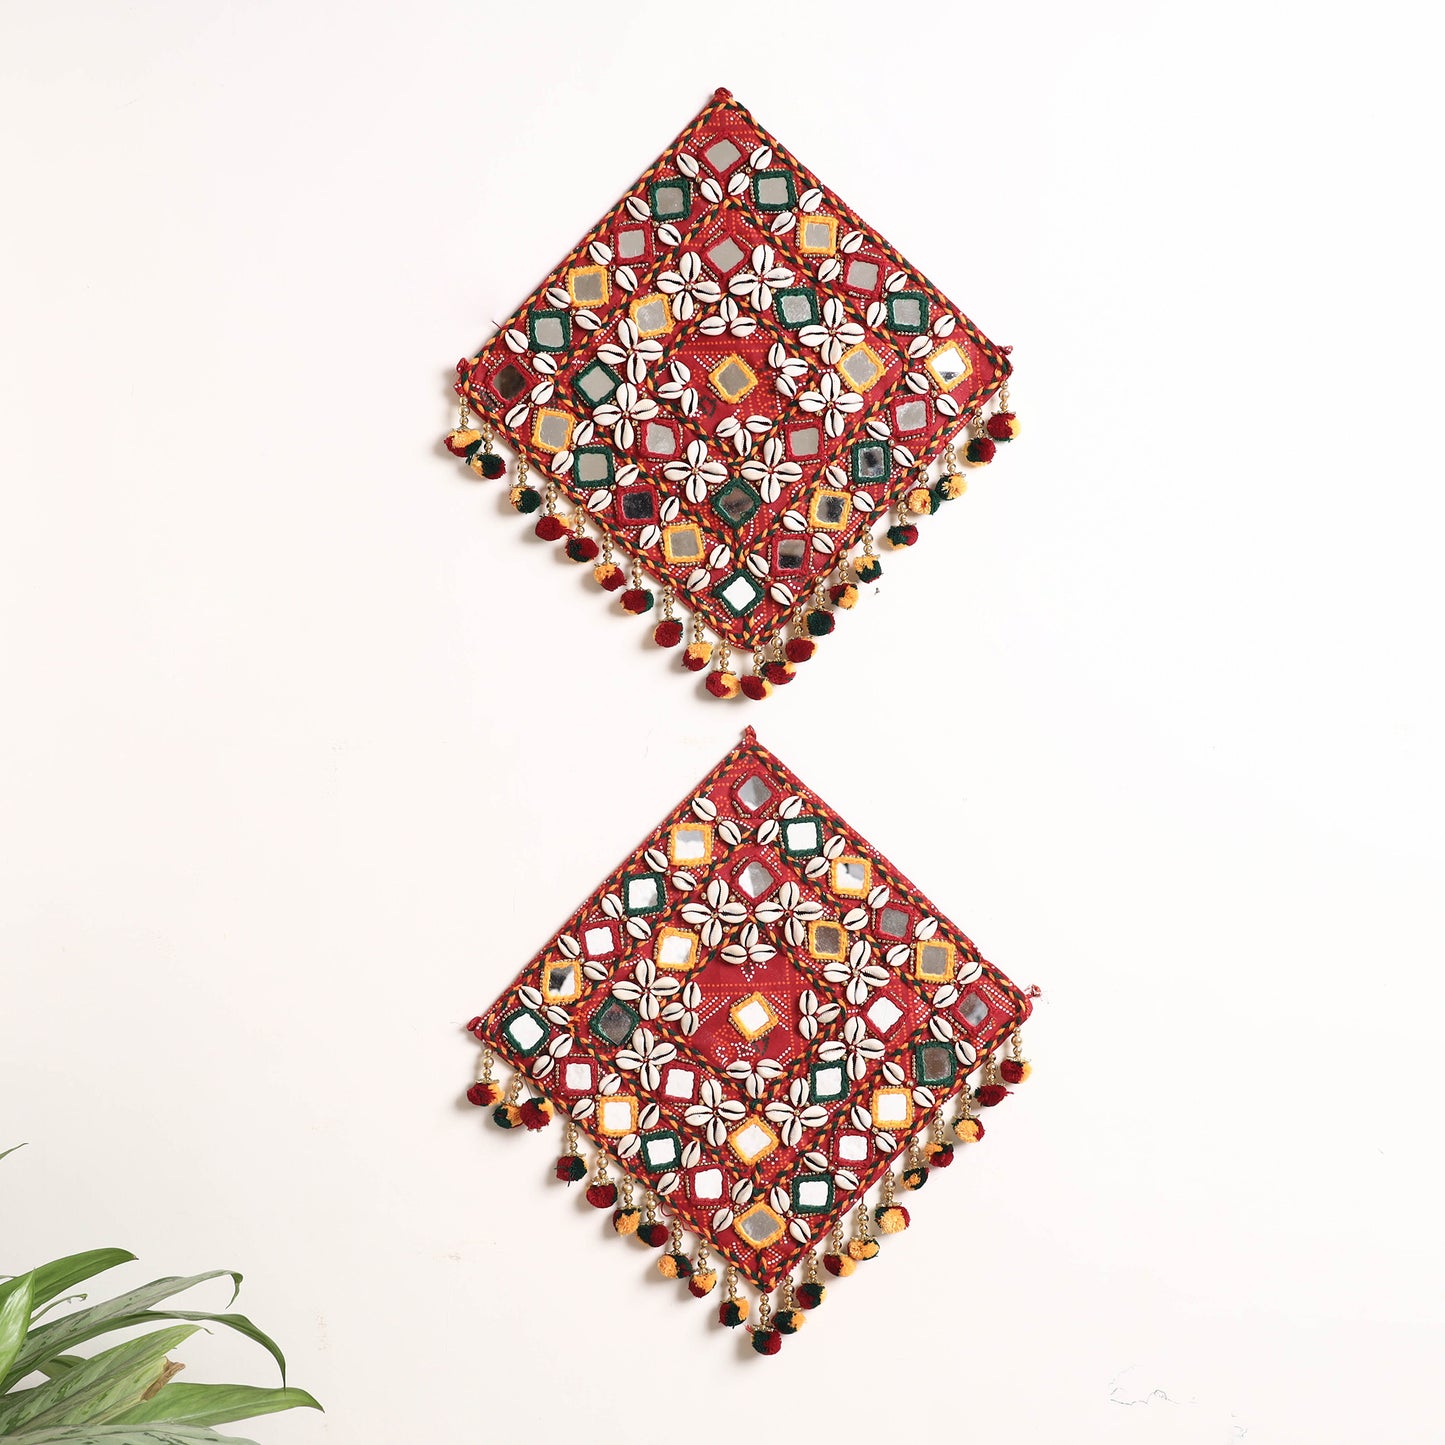 Embroidery Wall Hangings